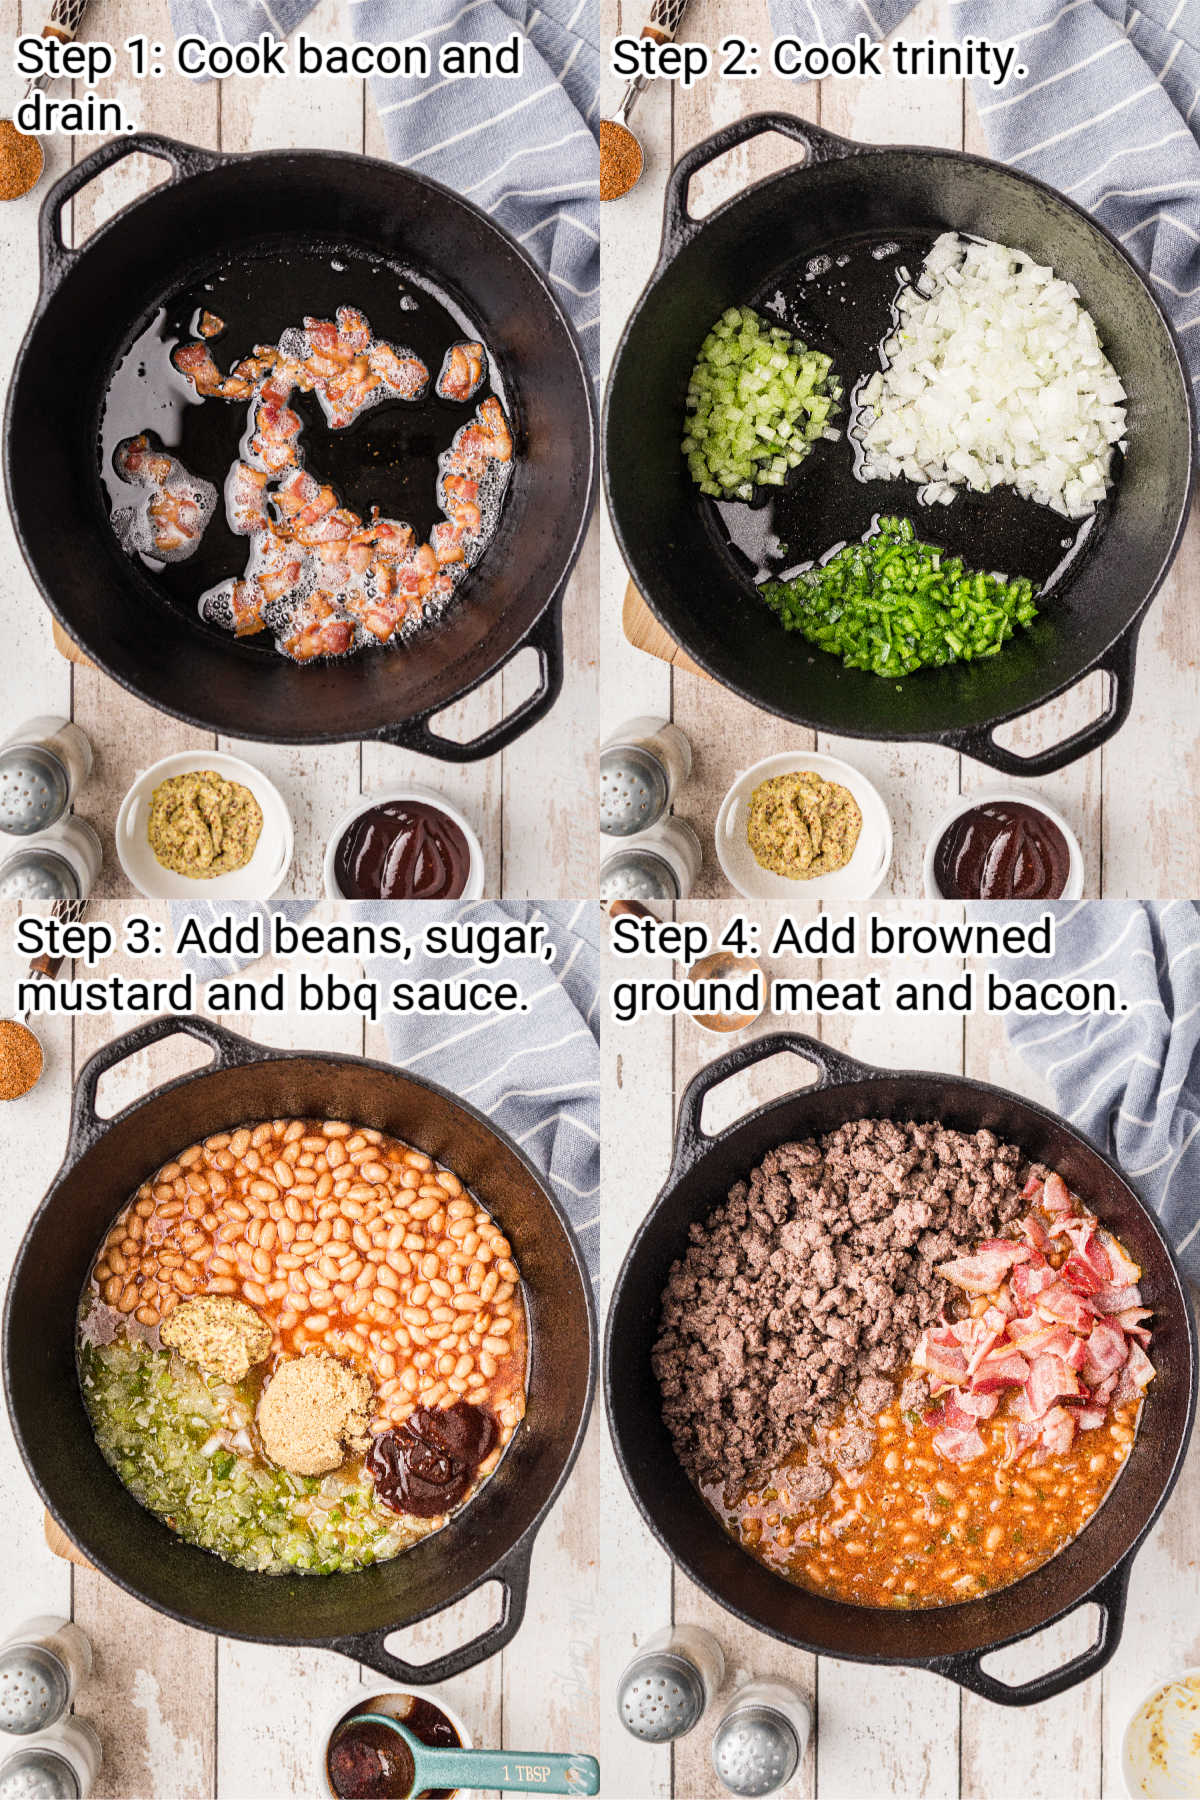 recipe steps 1 through 4 showing how to make southern baked beans